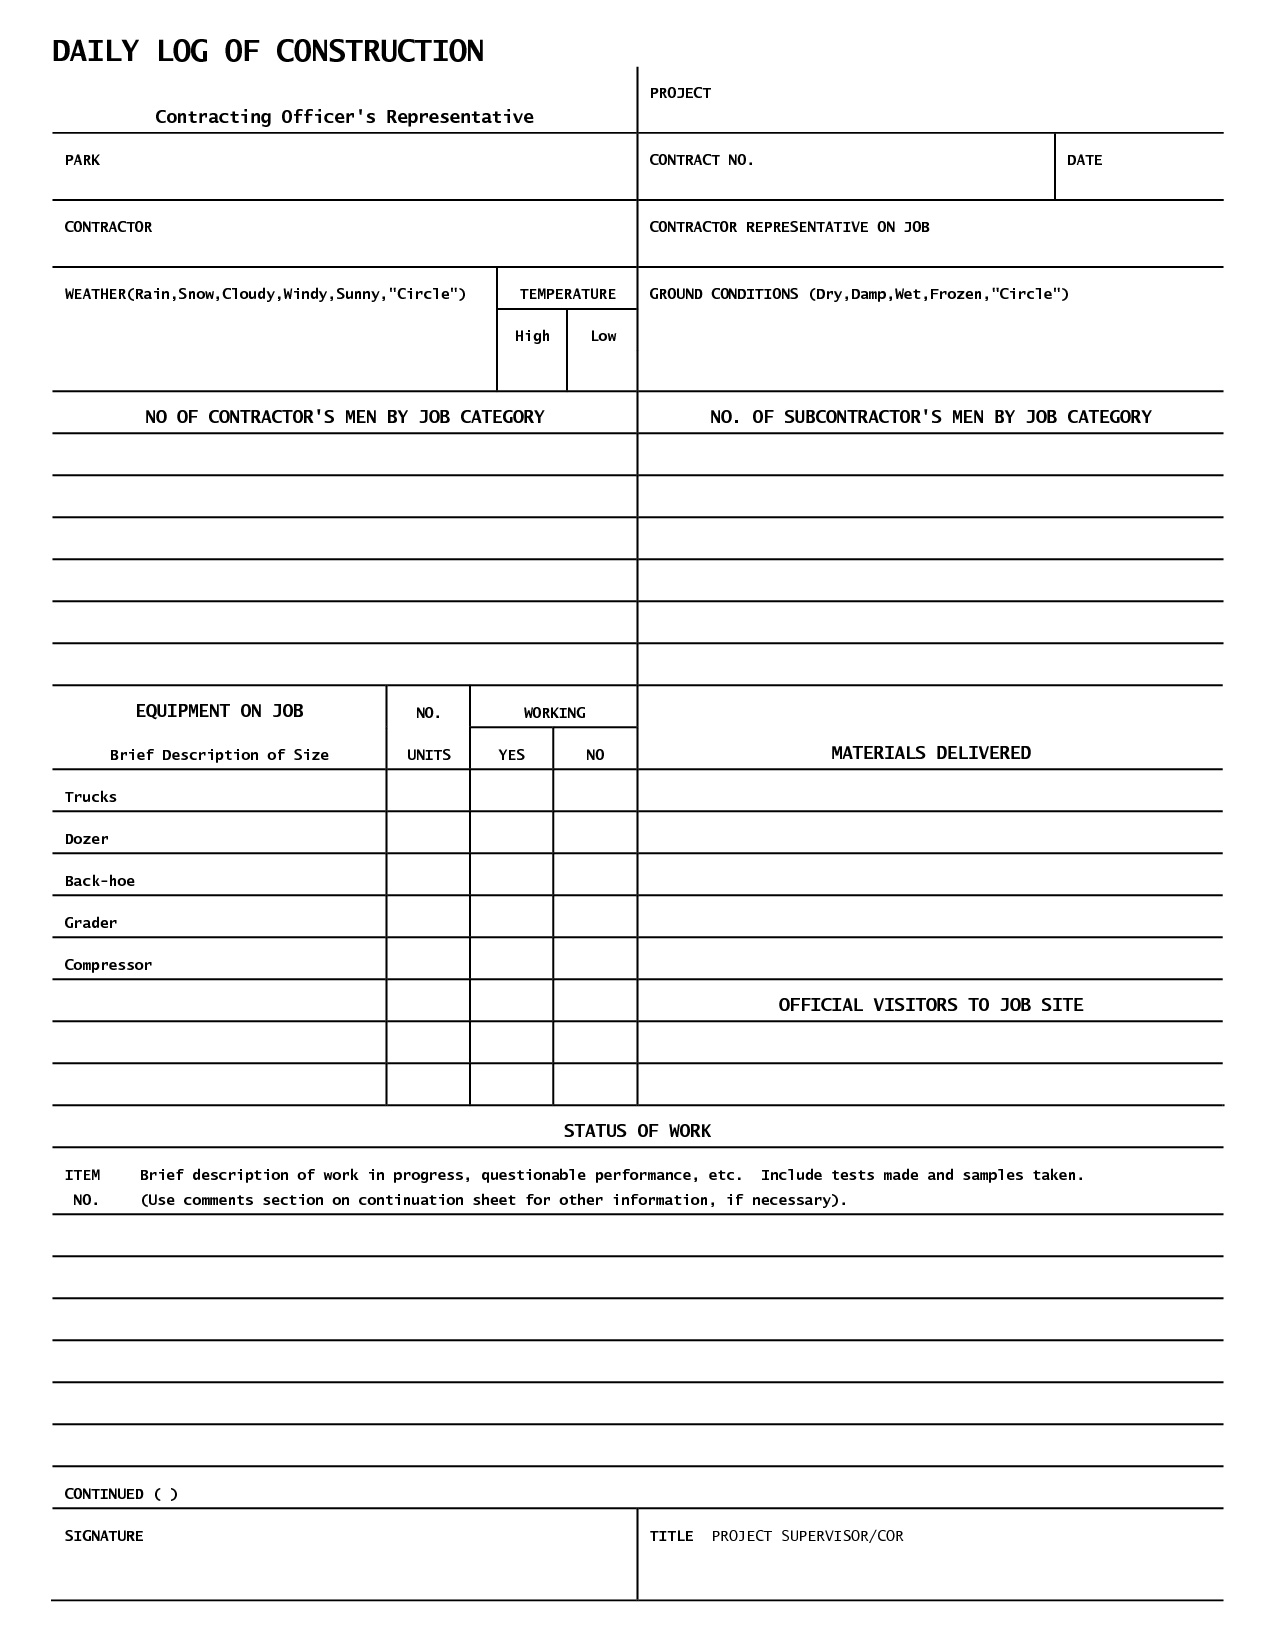 Daily Log Template For Construction Printable Schedule Within Best Office Log Book Template